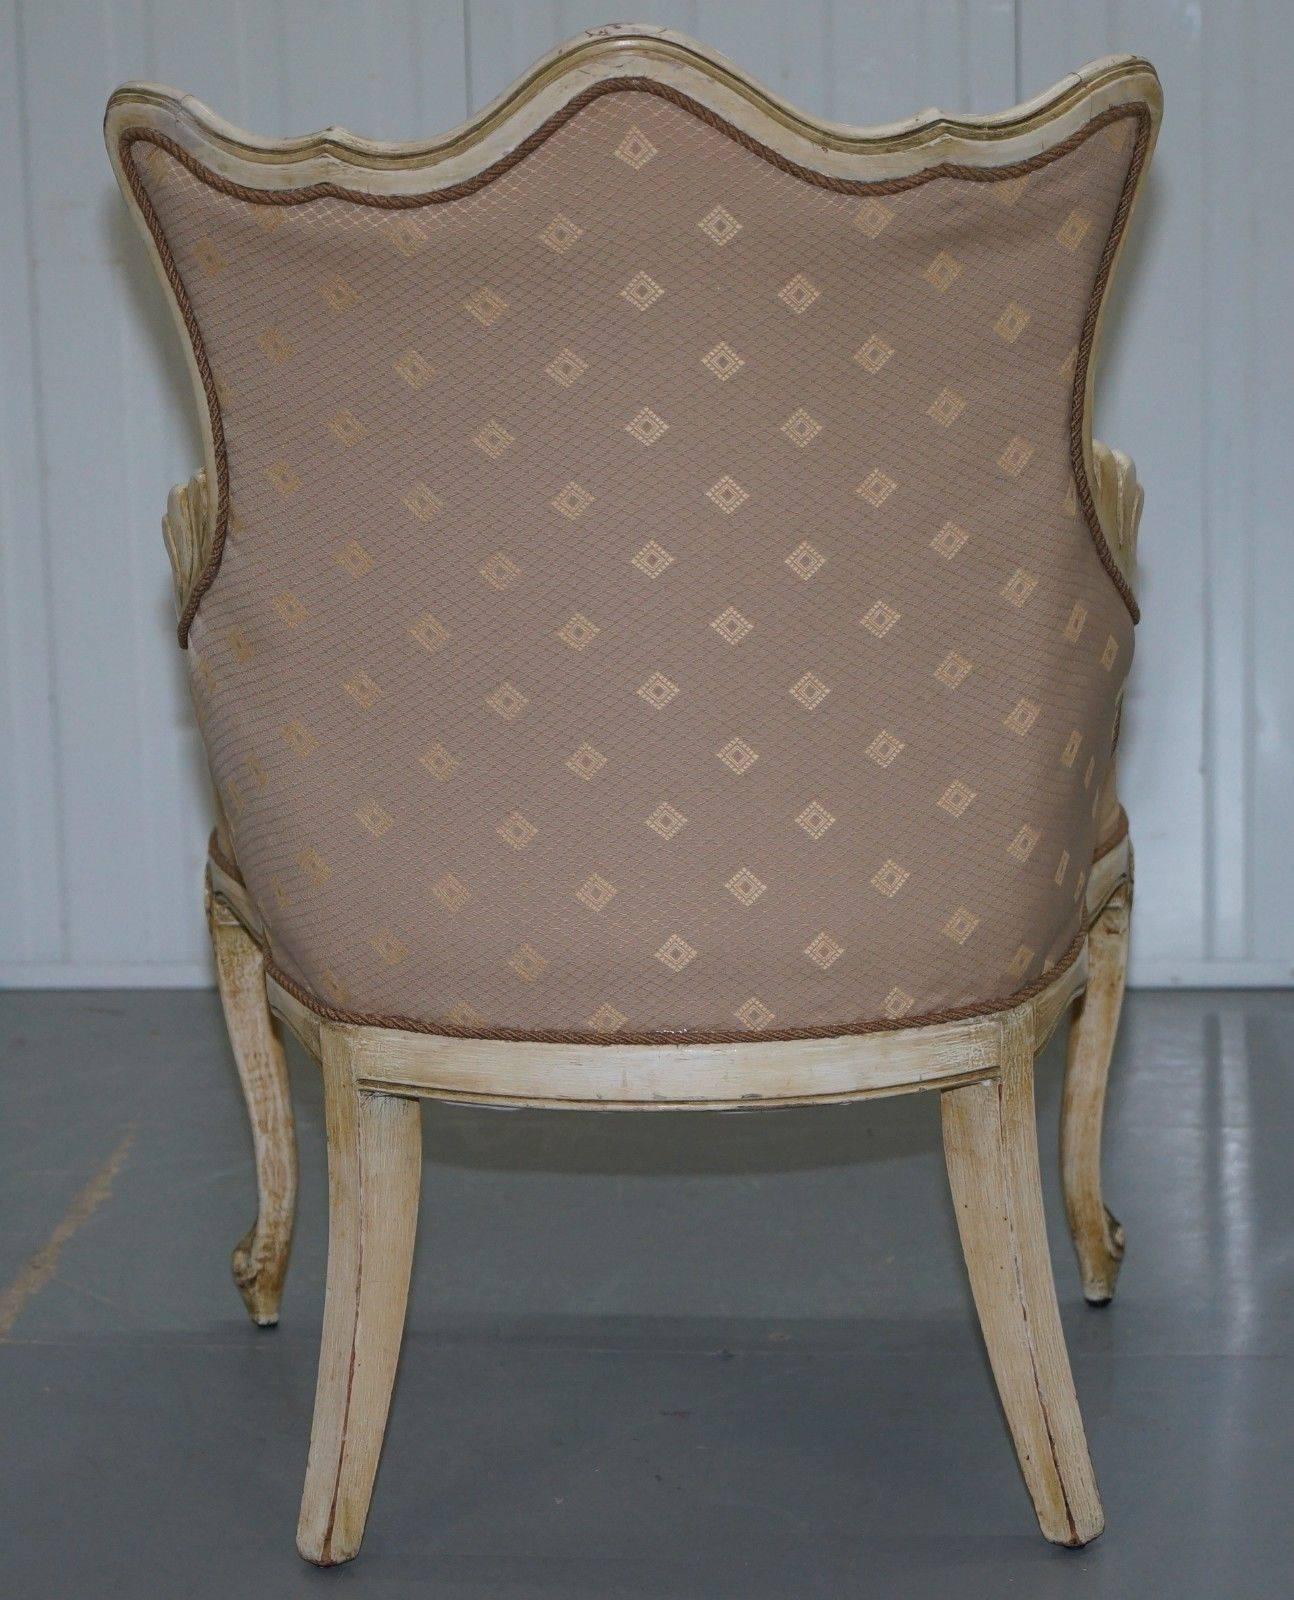 Hardwood Rare Vintage French Late 19th Century Occasional Armchair Shabby Chic Style